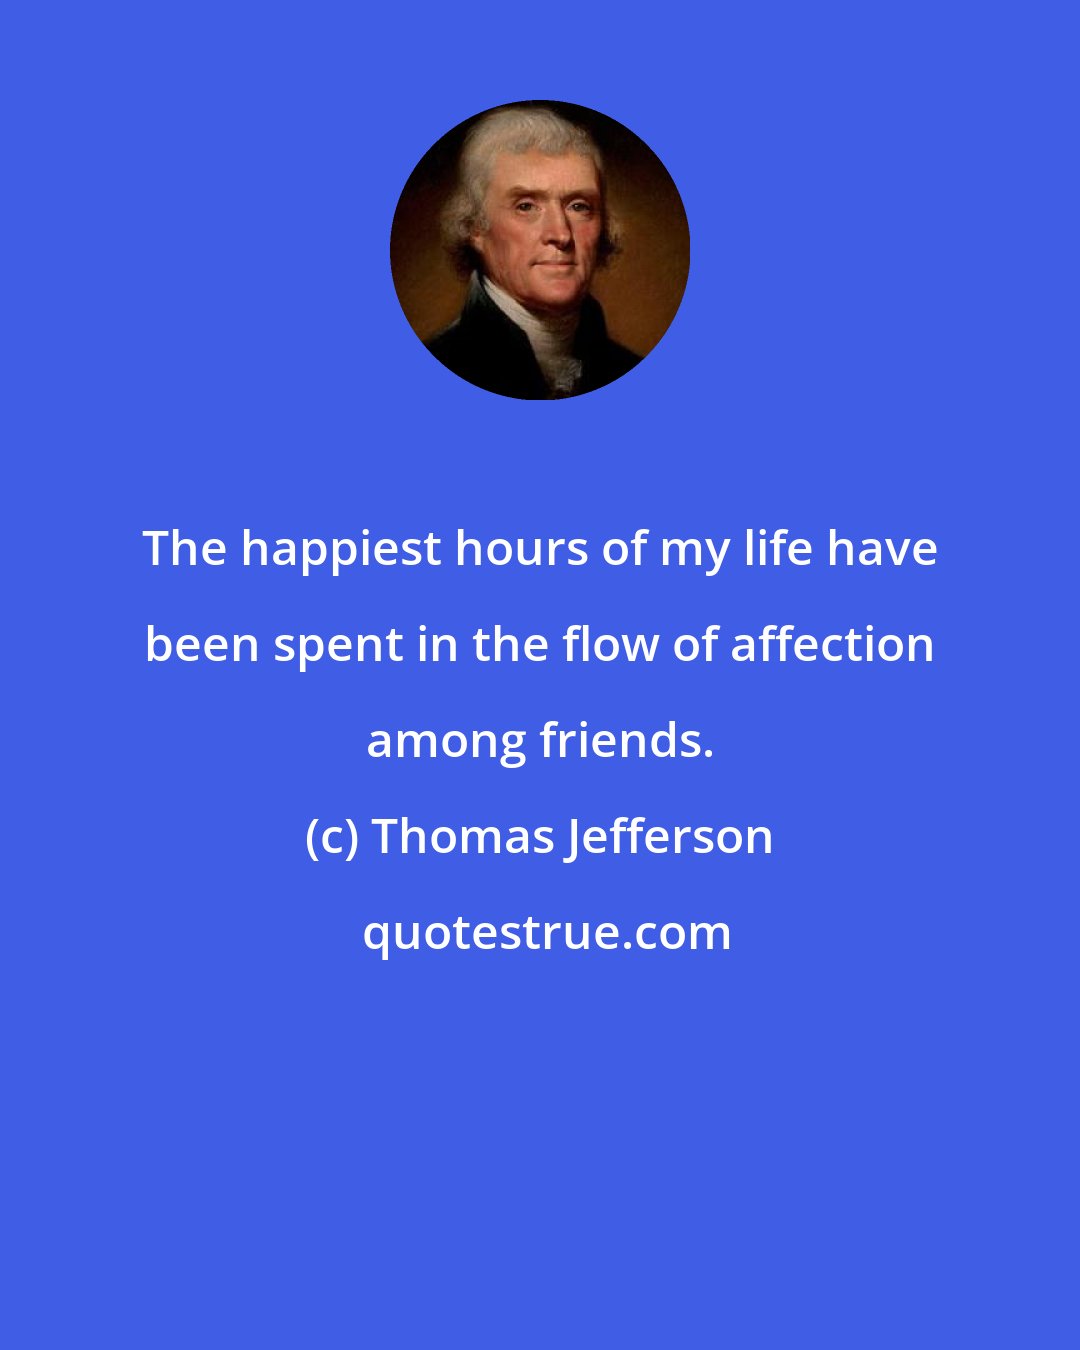 Thomas Jefferson: The happiest hours of my life have been spent in the flow of affection among friends.